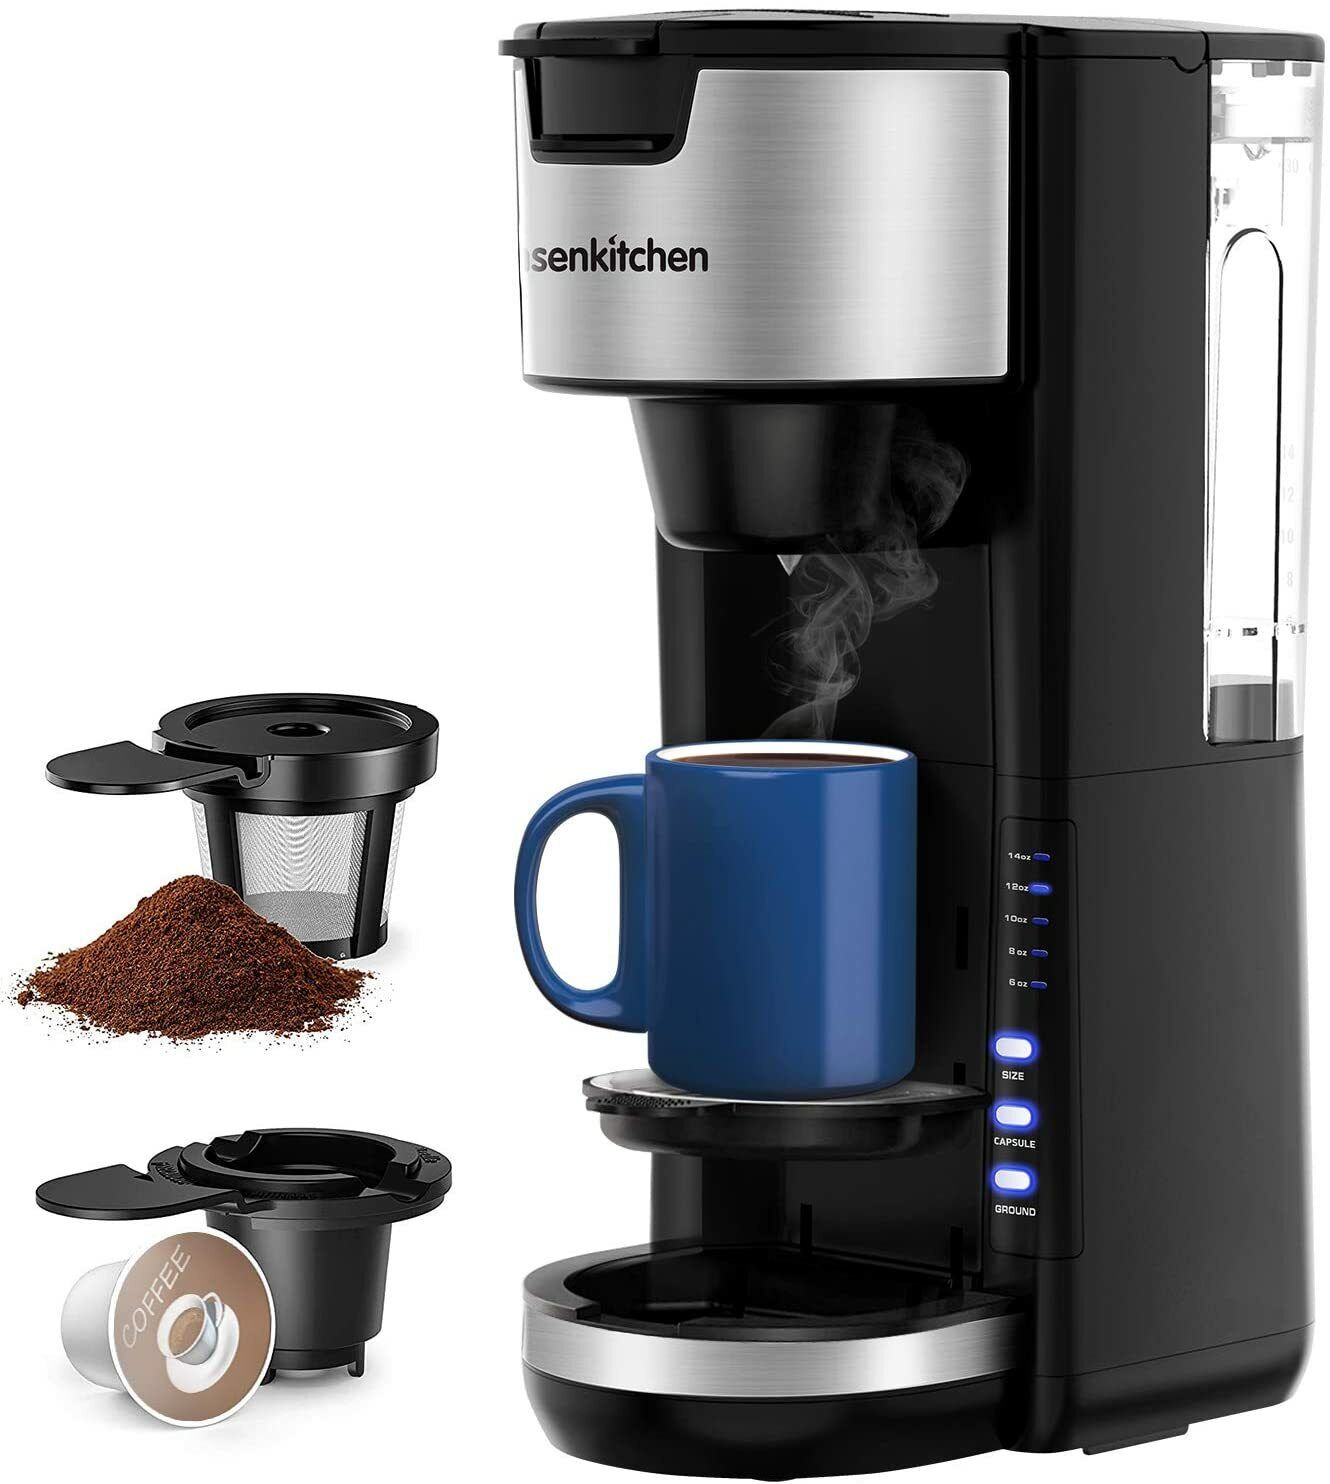 Bonsenkitchen 2 in 1 compact and durable coffee maker